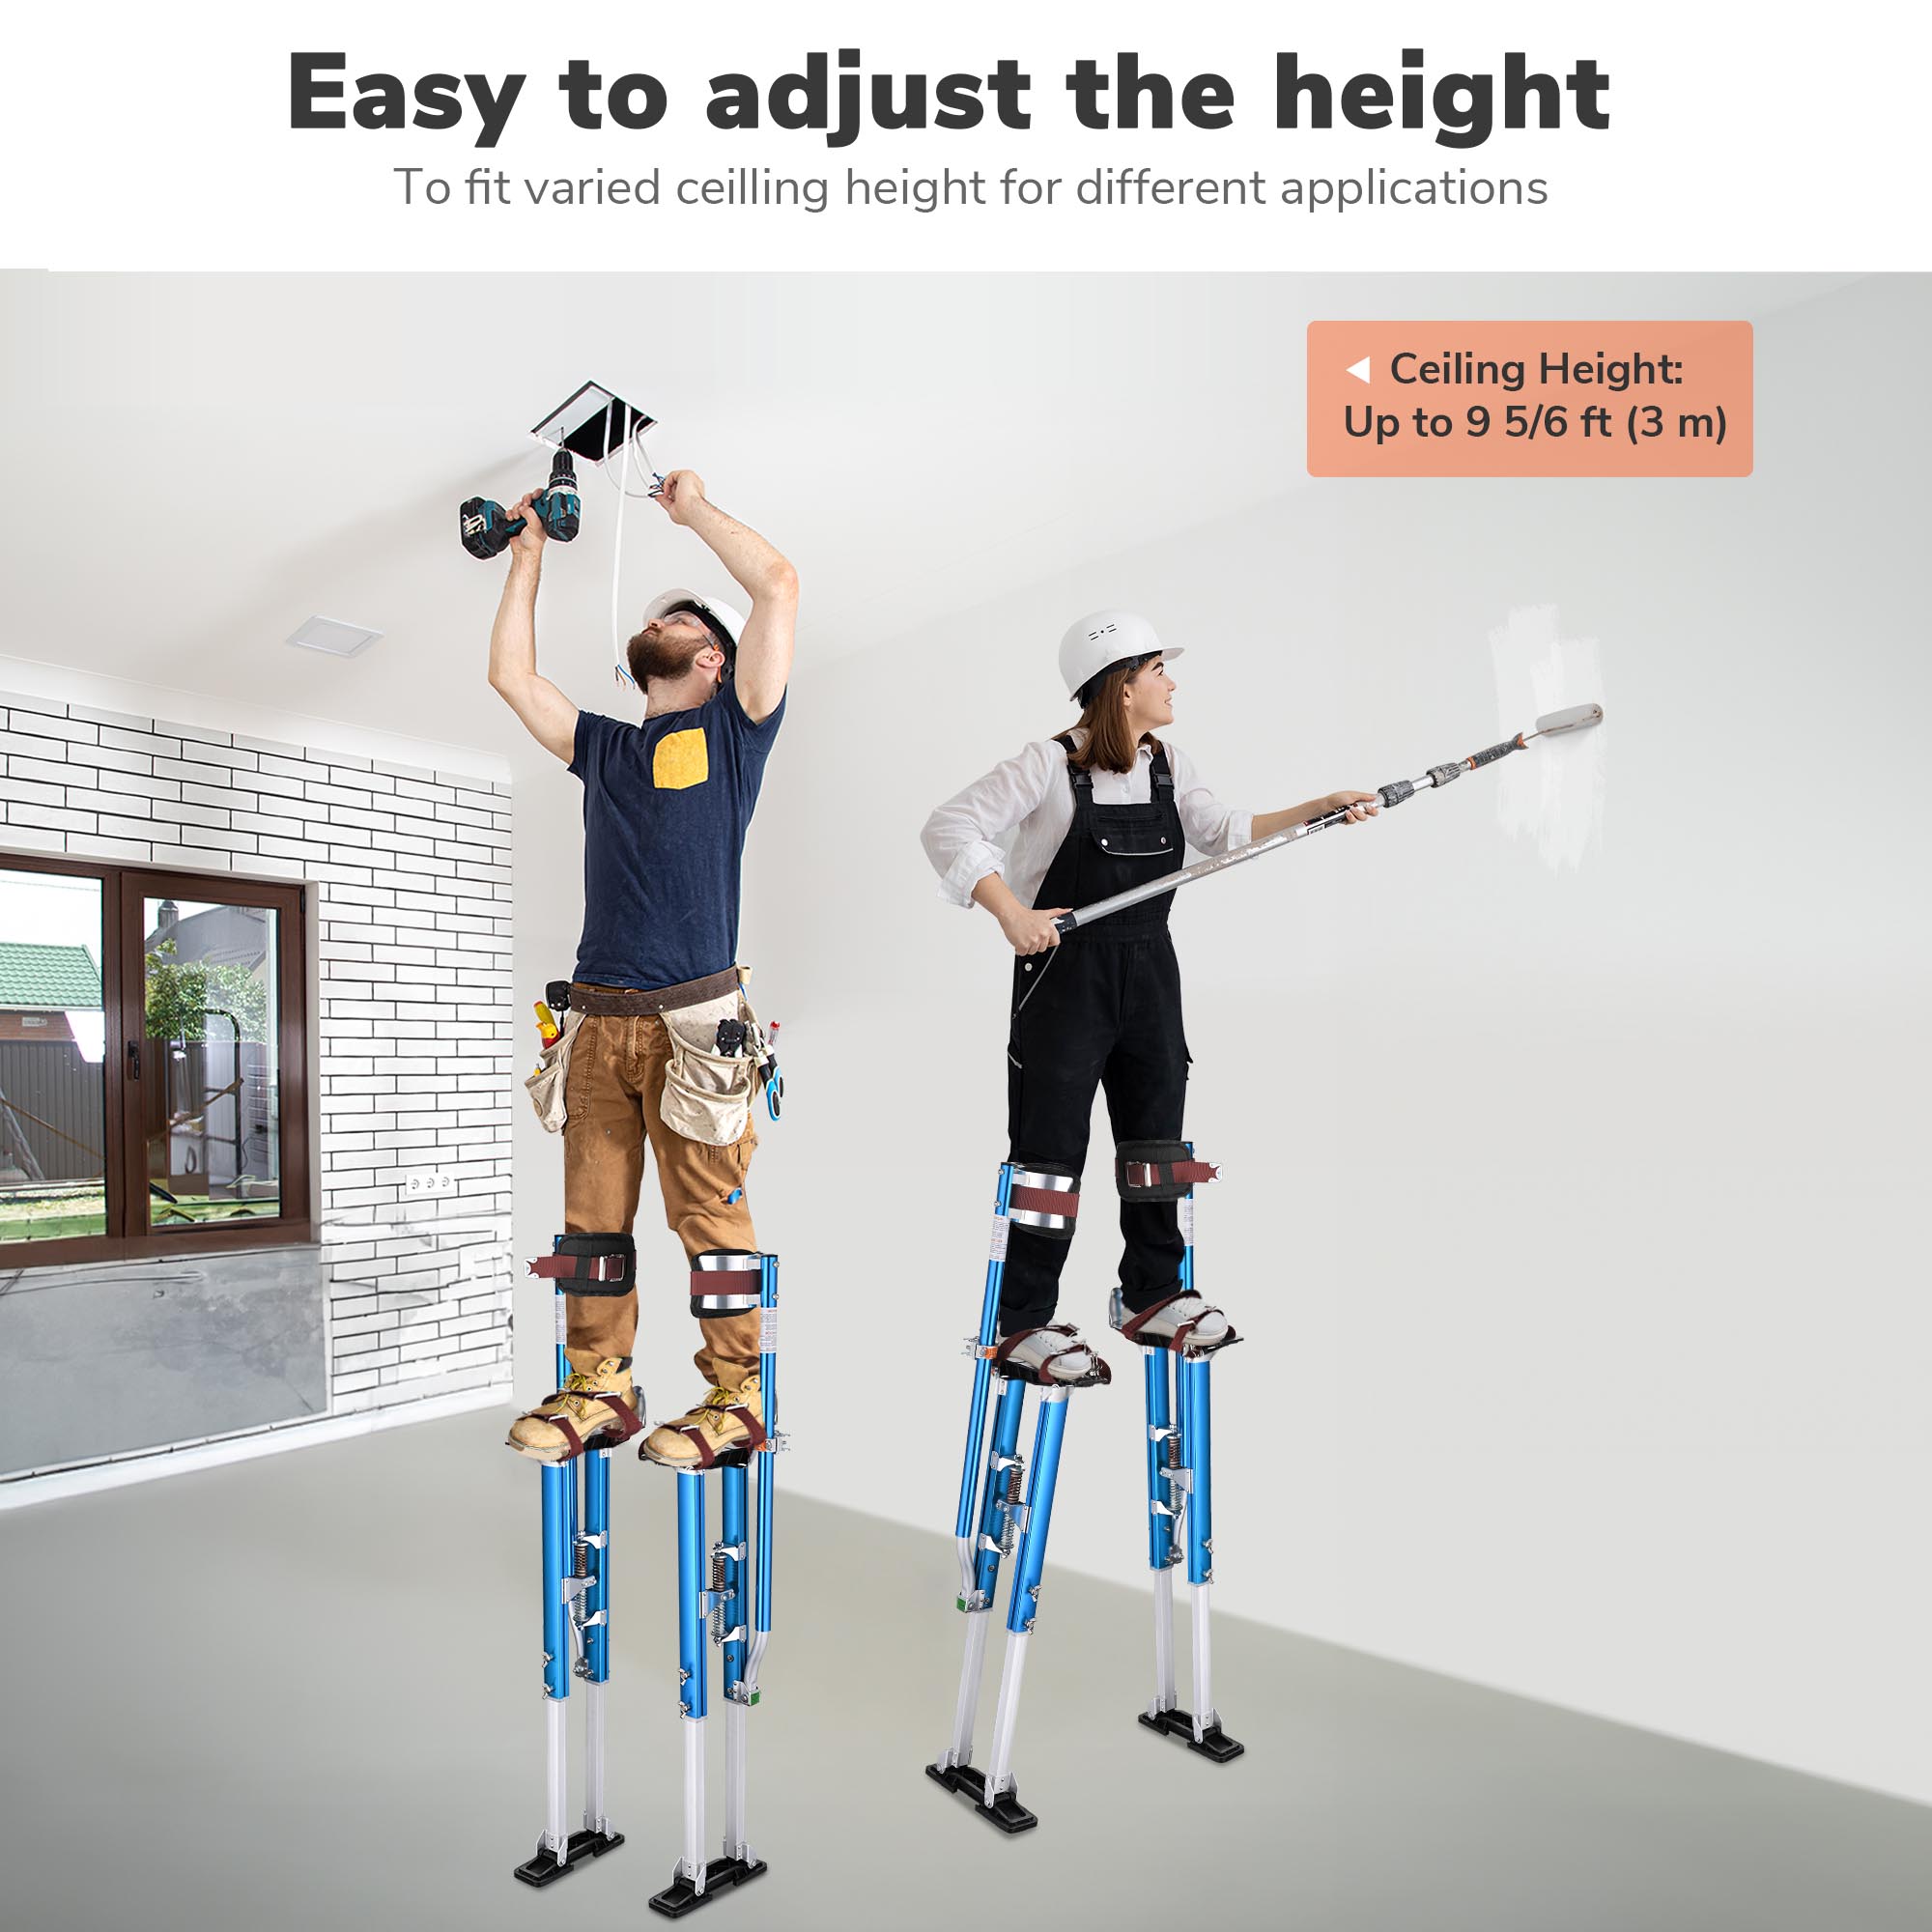 Yescom 36" - 50" Aluminum Drywall Stilts Adjustable Lifts Tool for Painting Painter Taping Blue